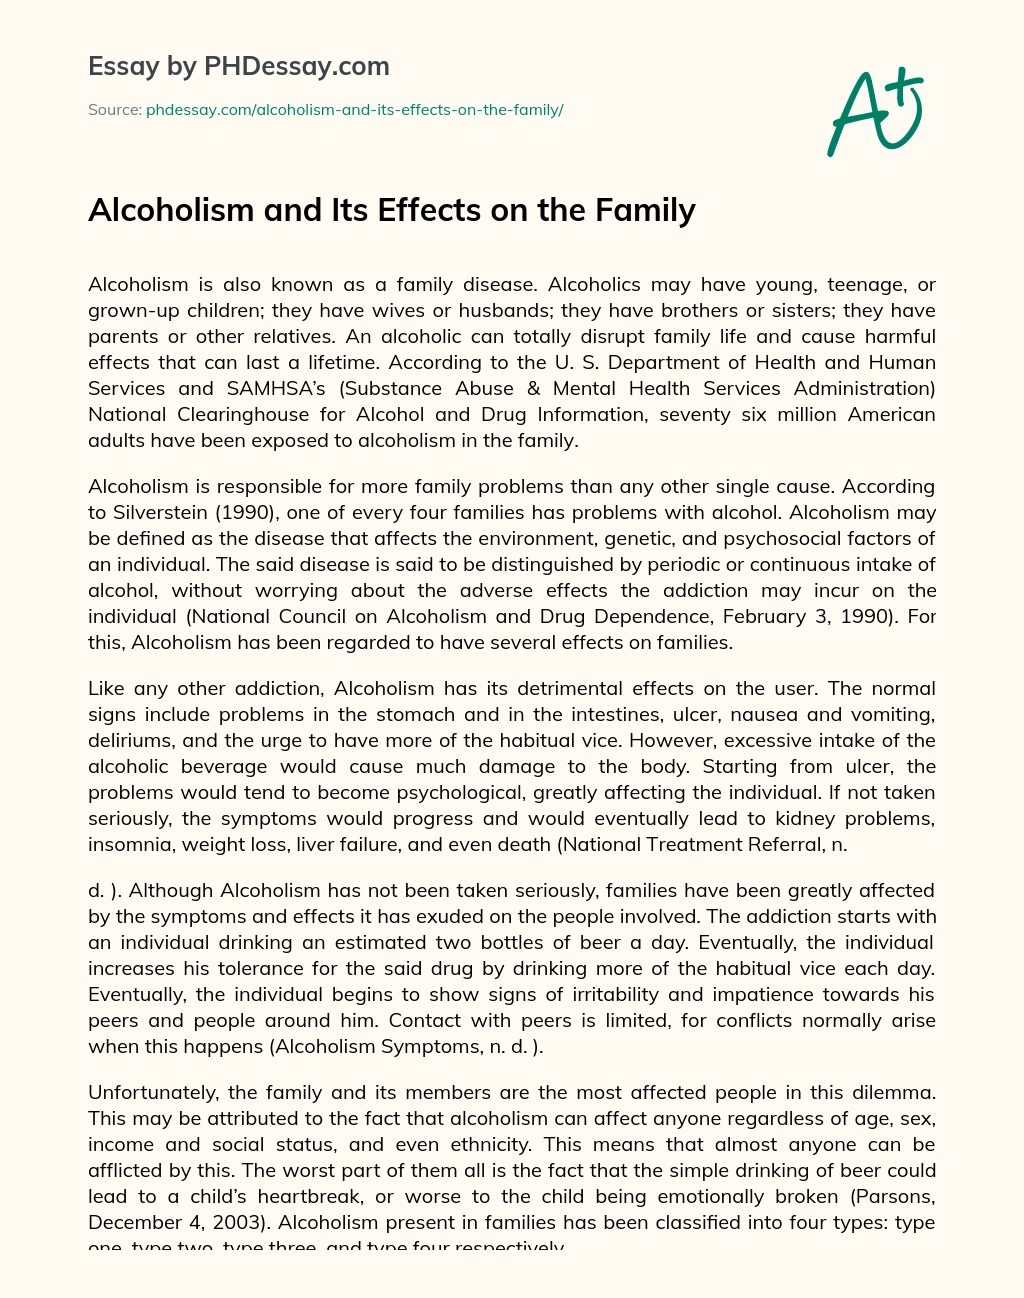 alcoholism in the family essay